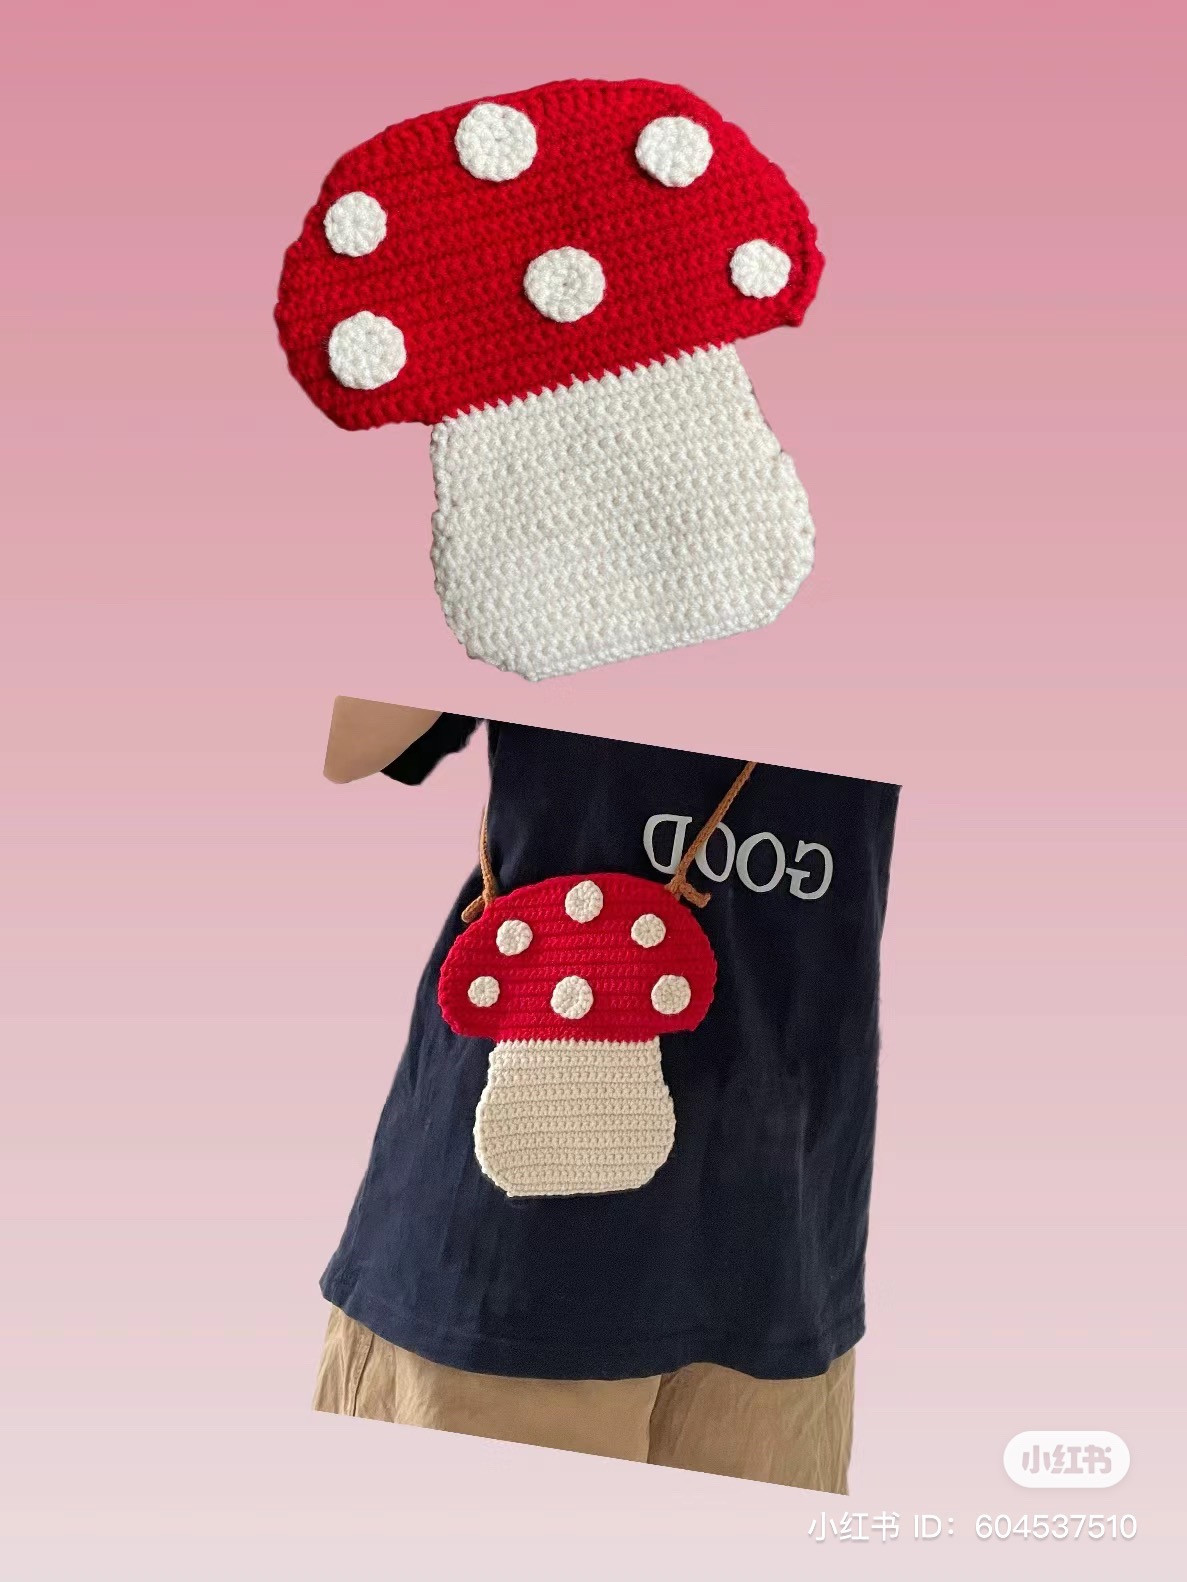 Mushroom bag crochet pattern with red hat and white body